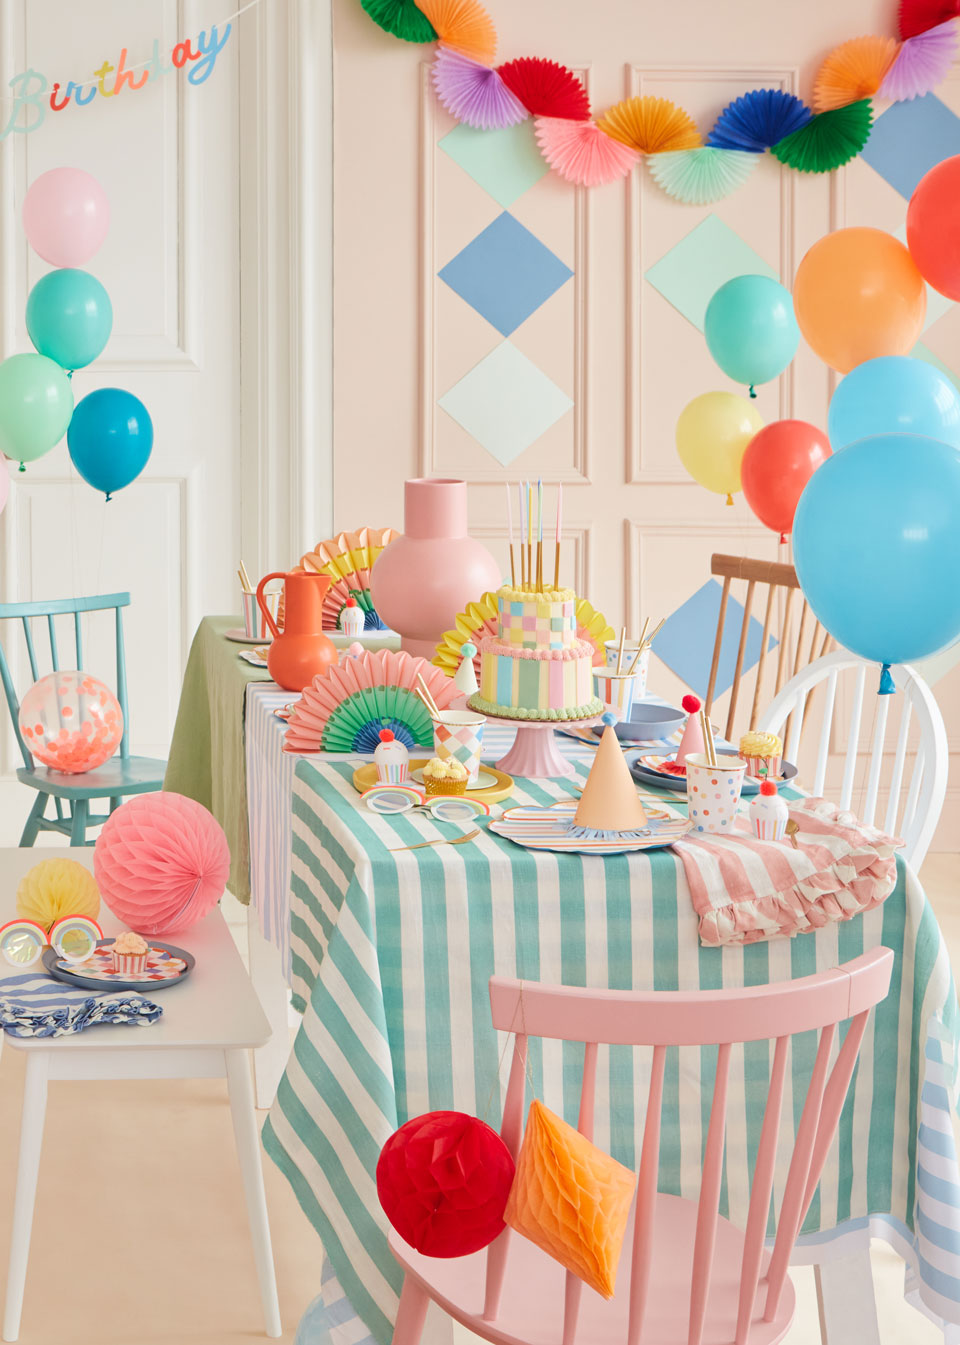 A dining room displays a multitude of colorful garlands and tableware, including honeycomb ornaments, pastel balloons, and ruffled-edge napkins.